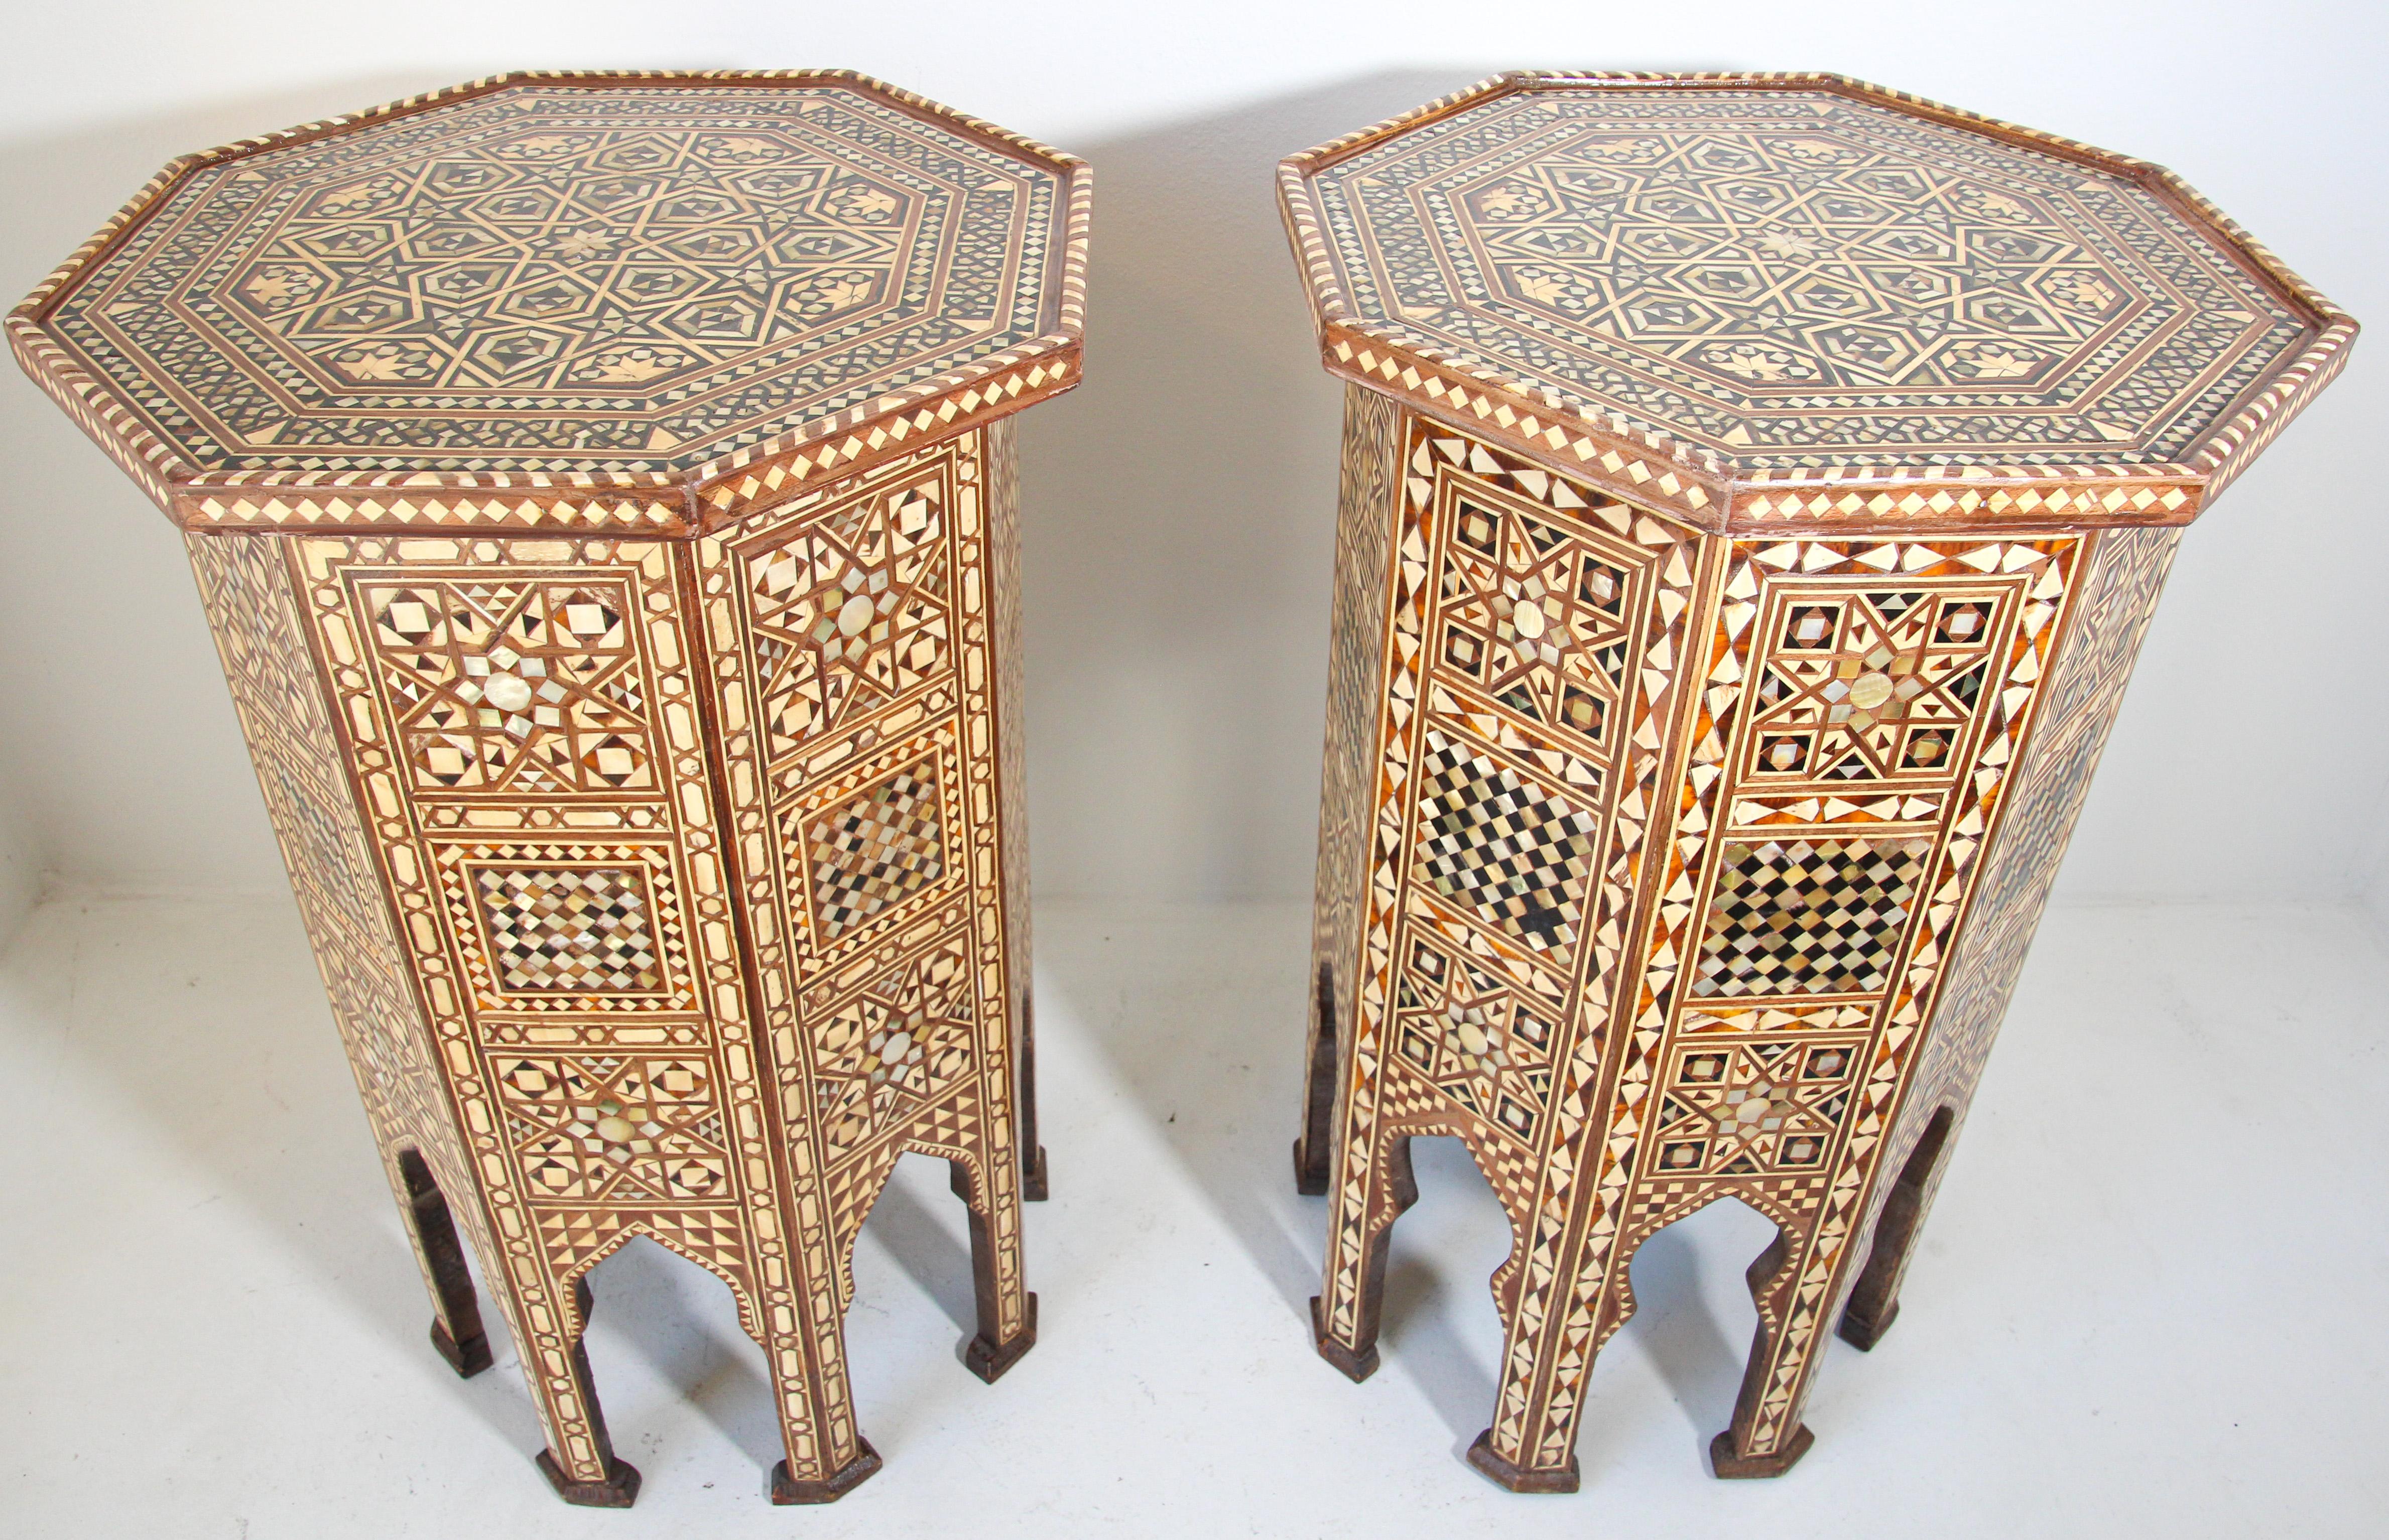 Pair of Moroccan Moorish style walnut octagonal pedestal tables inlaid with mosaic marquetry.
Tabletop is of octagonal form, decorated with various geometric and arabesque designs.
The table is standing on eight legs separated by cusped and engraved